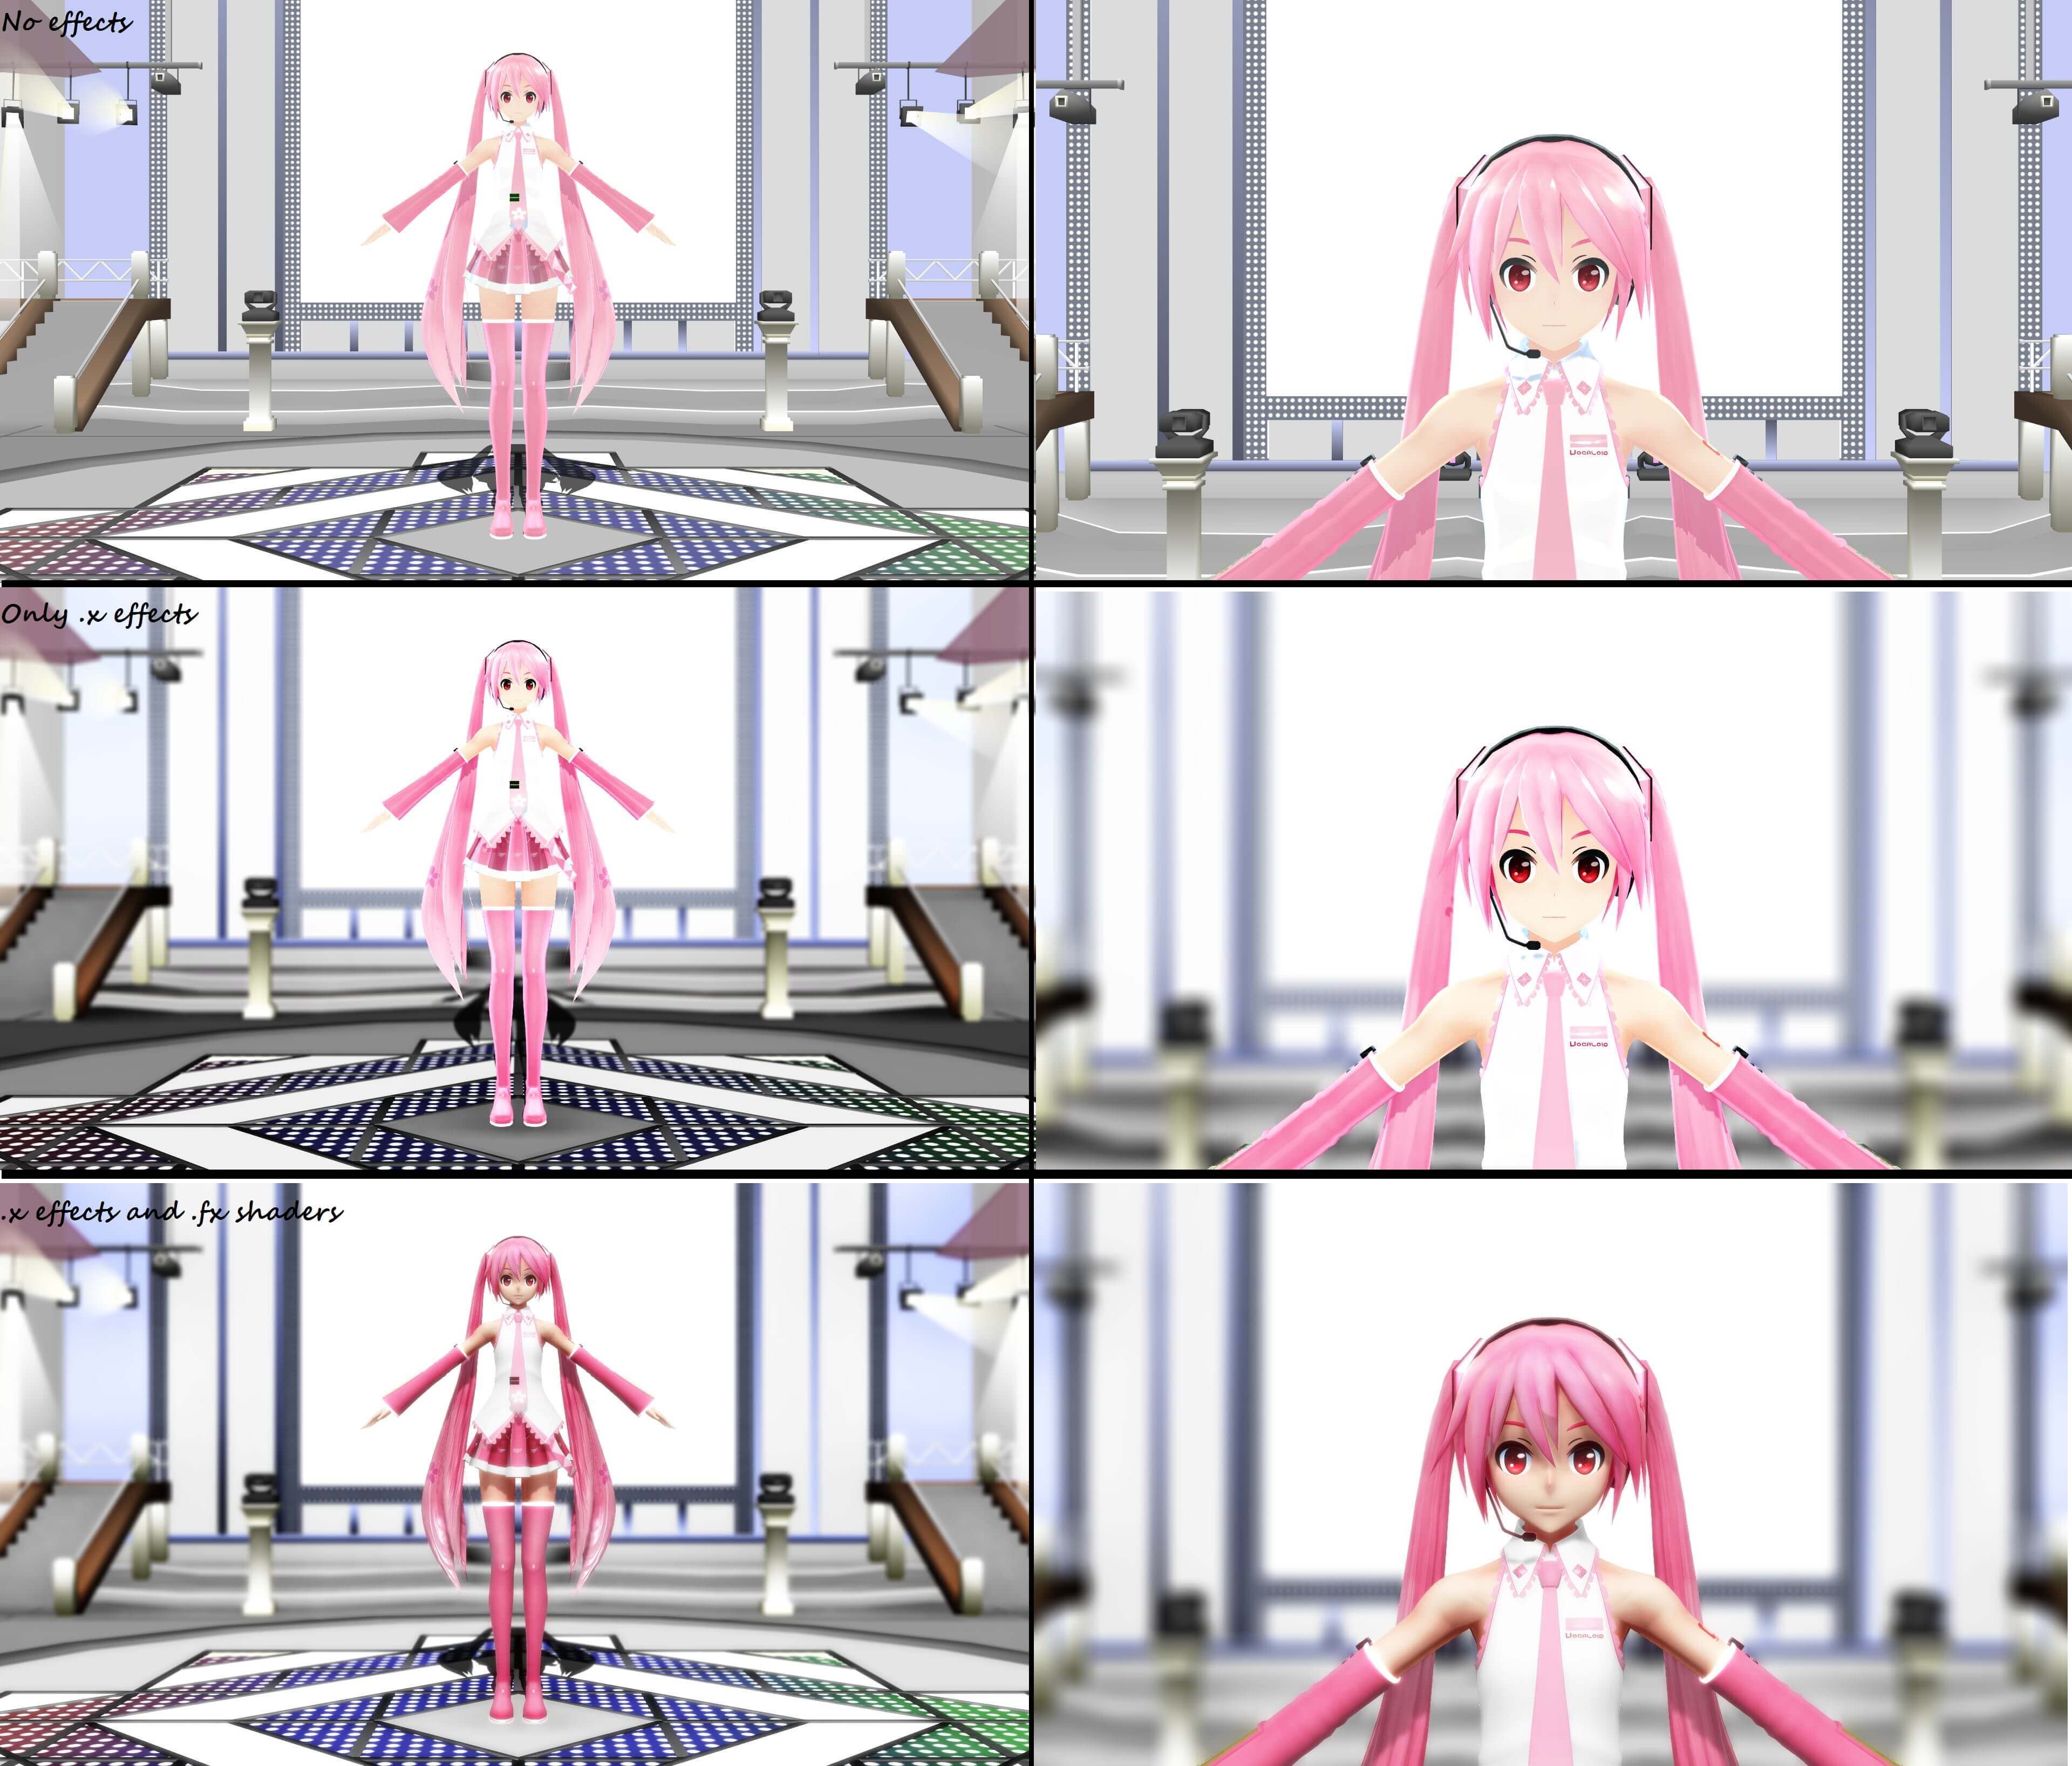 [MMD] pmotskin +other effects [Comparison]